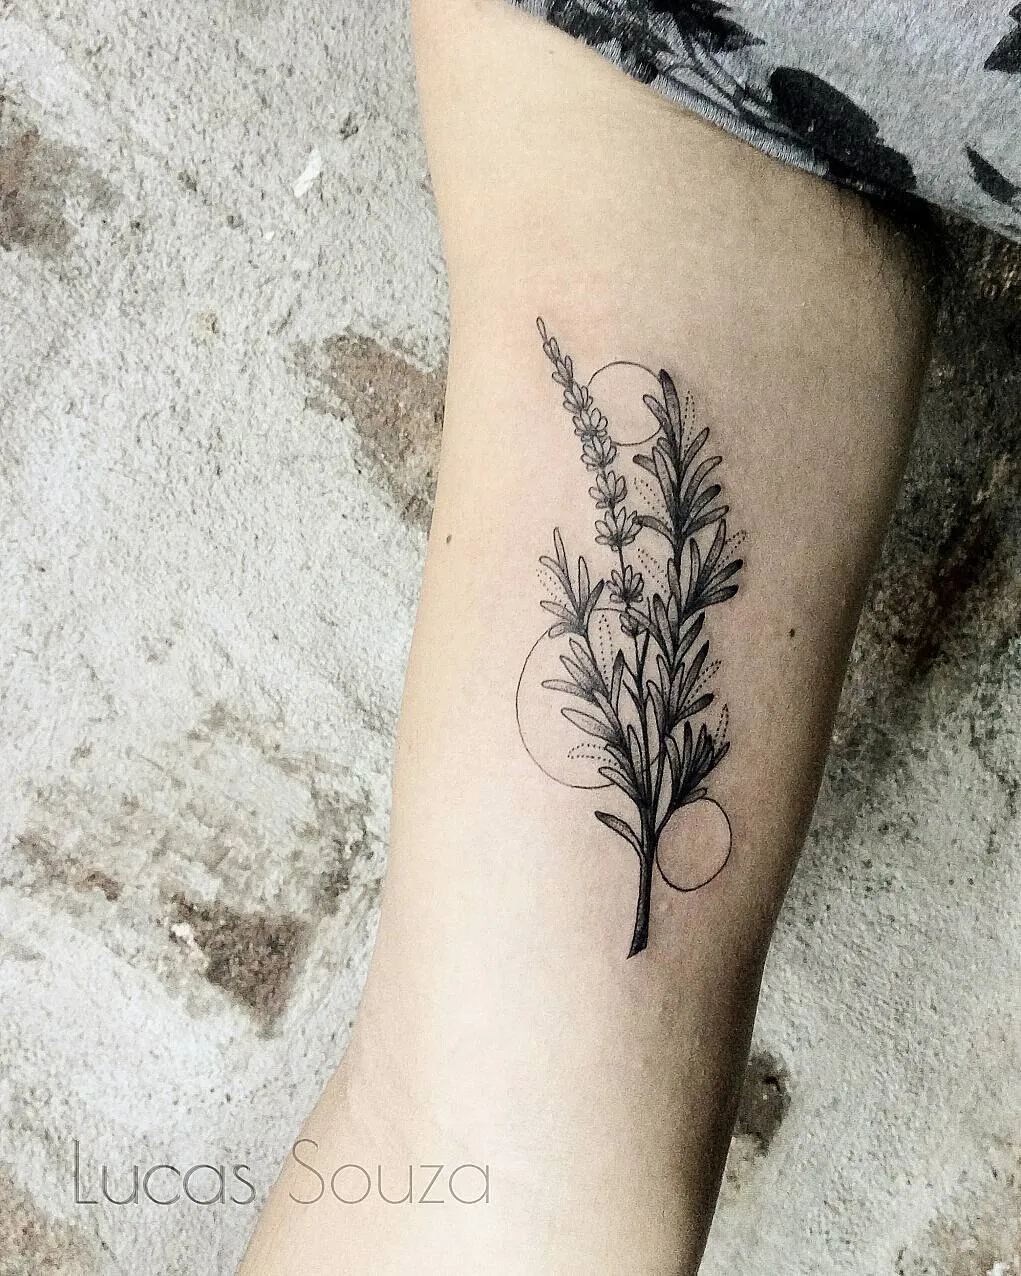 Colorful Sprig of Rosemary Tattoo on Forearm